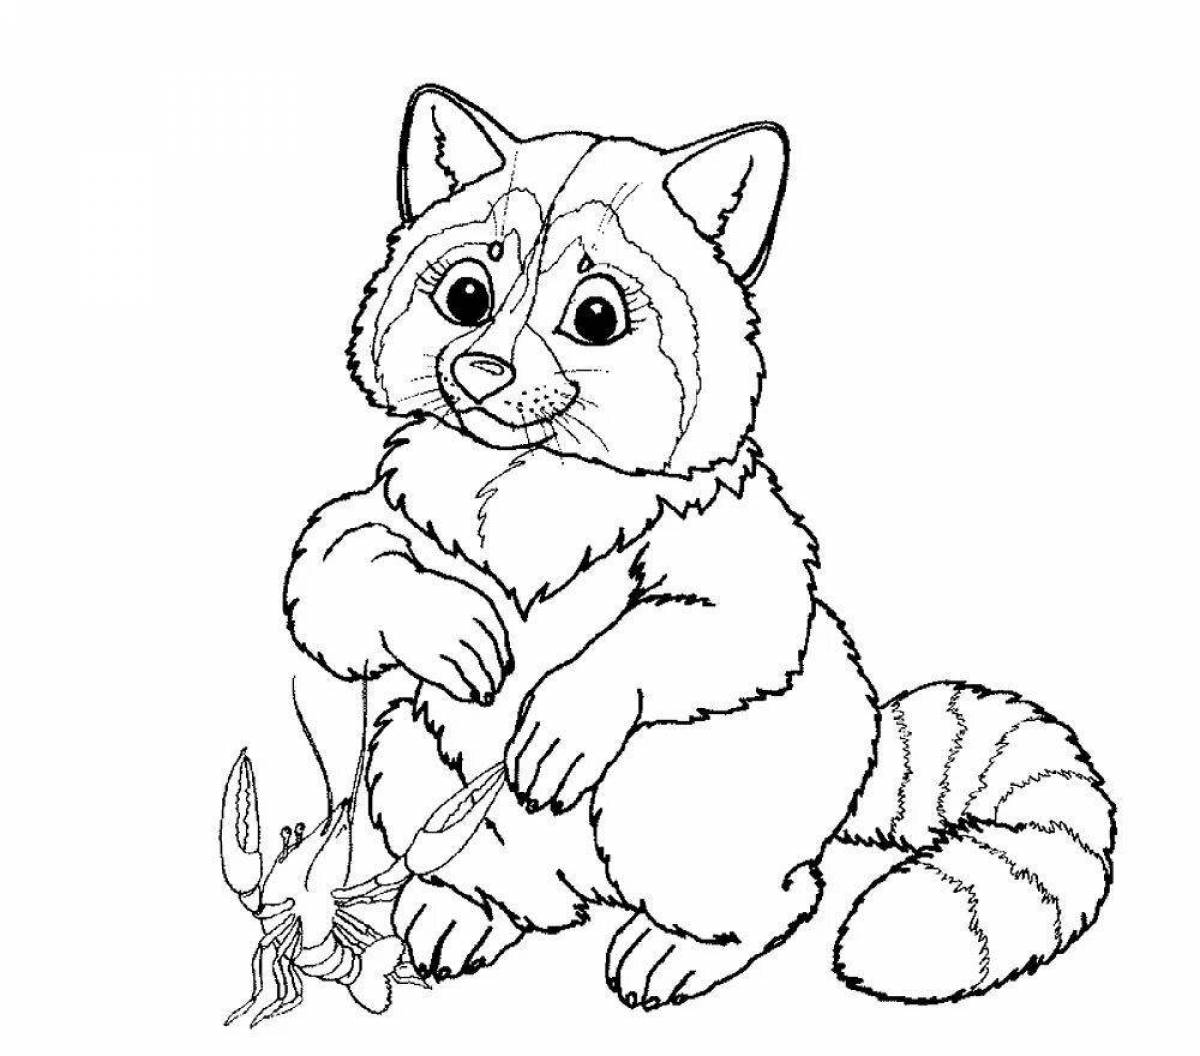 Living forest animal coloring page